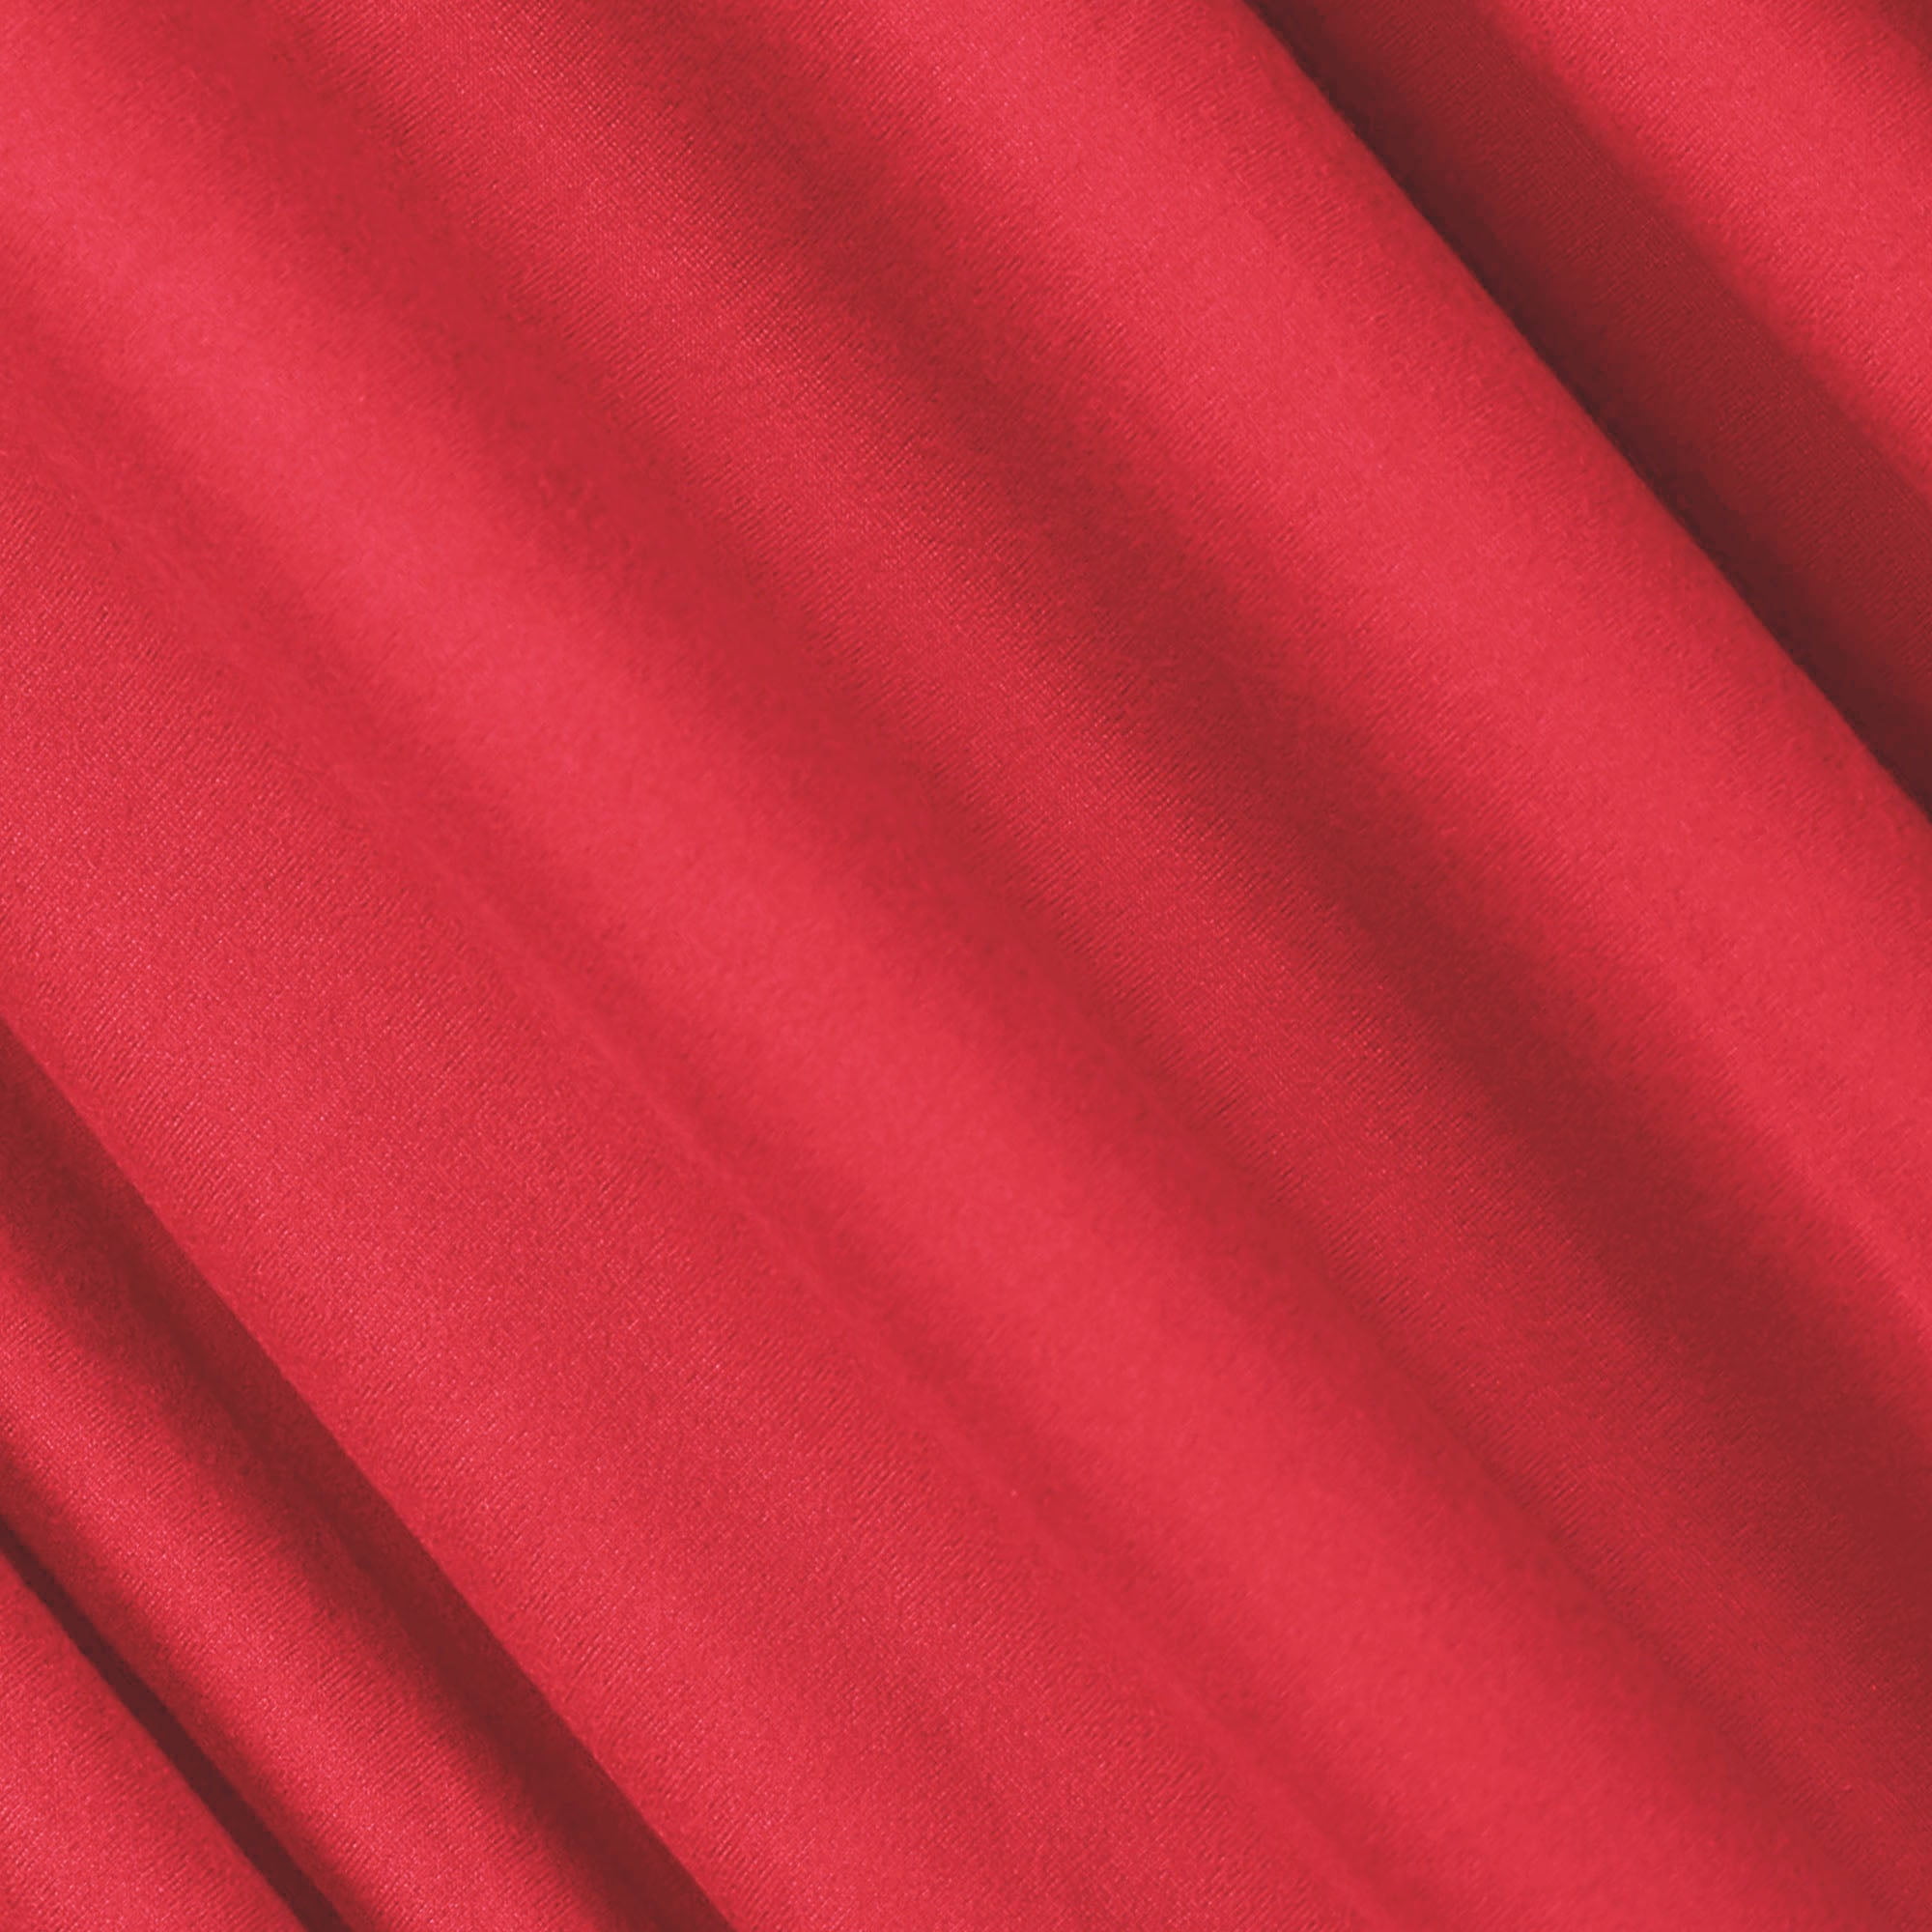 Plain Silk Fabrics For Making Garments, 150 Gsm And Washable at